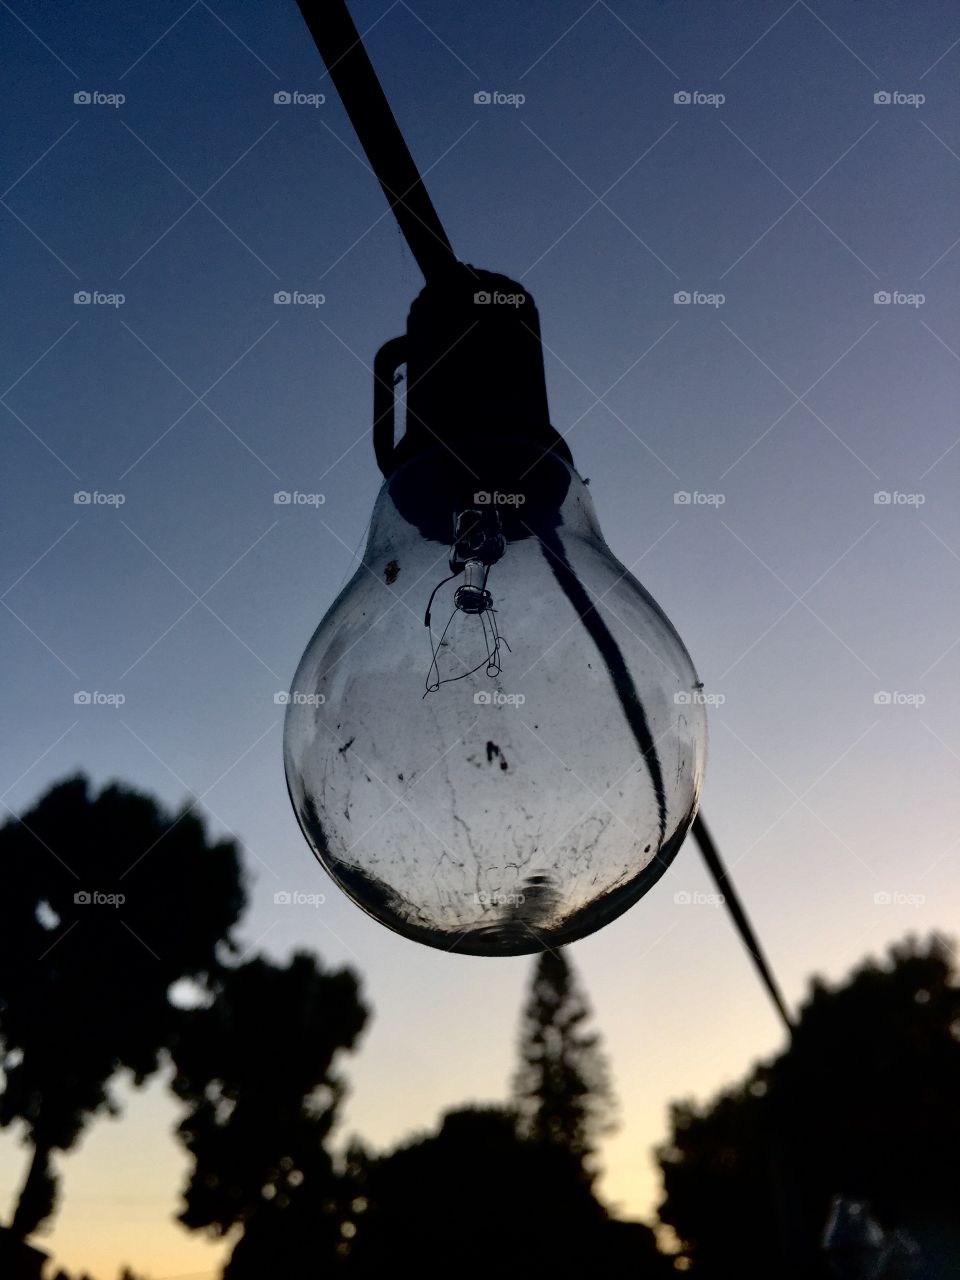 Inspiration strikes in unlikely places, as a single light bulb contrasts against the painted dusk sky.